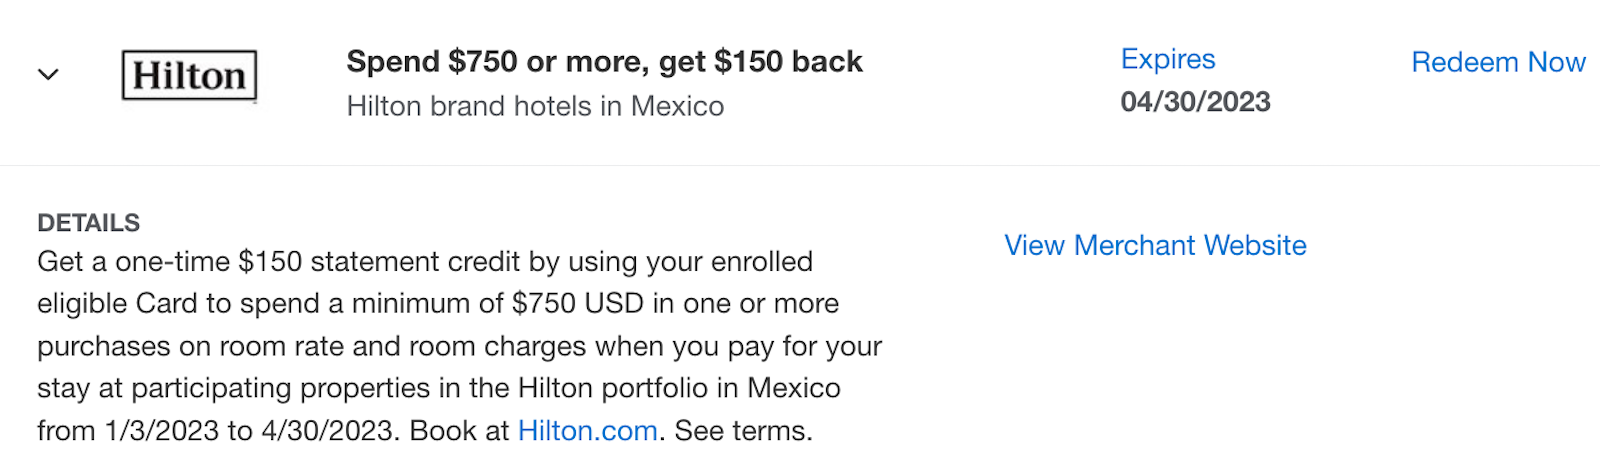 details of an Amex Offer